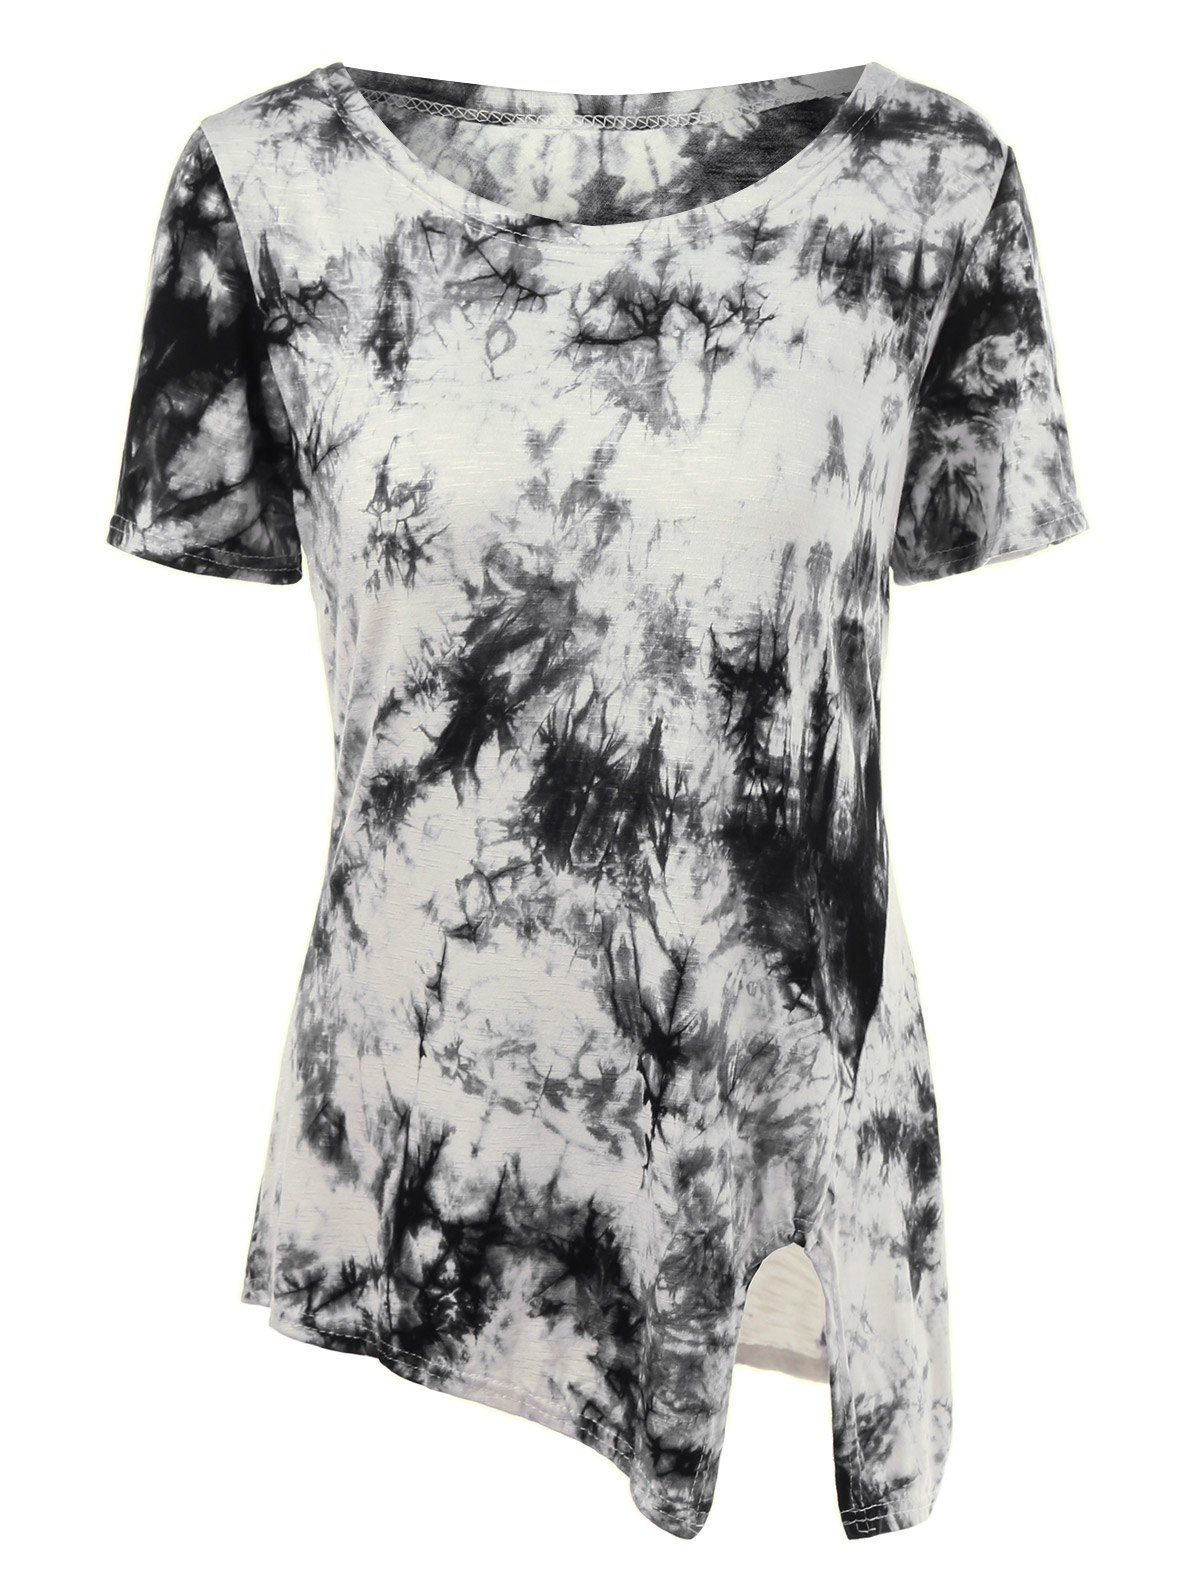 [41% OFF] 2020 Tie-Dyed Plus Size T-Shirt In COLORMIX | DressLily